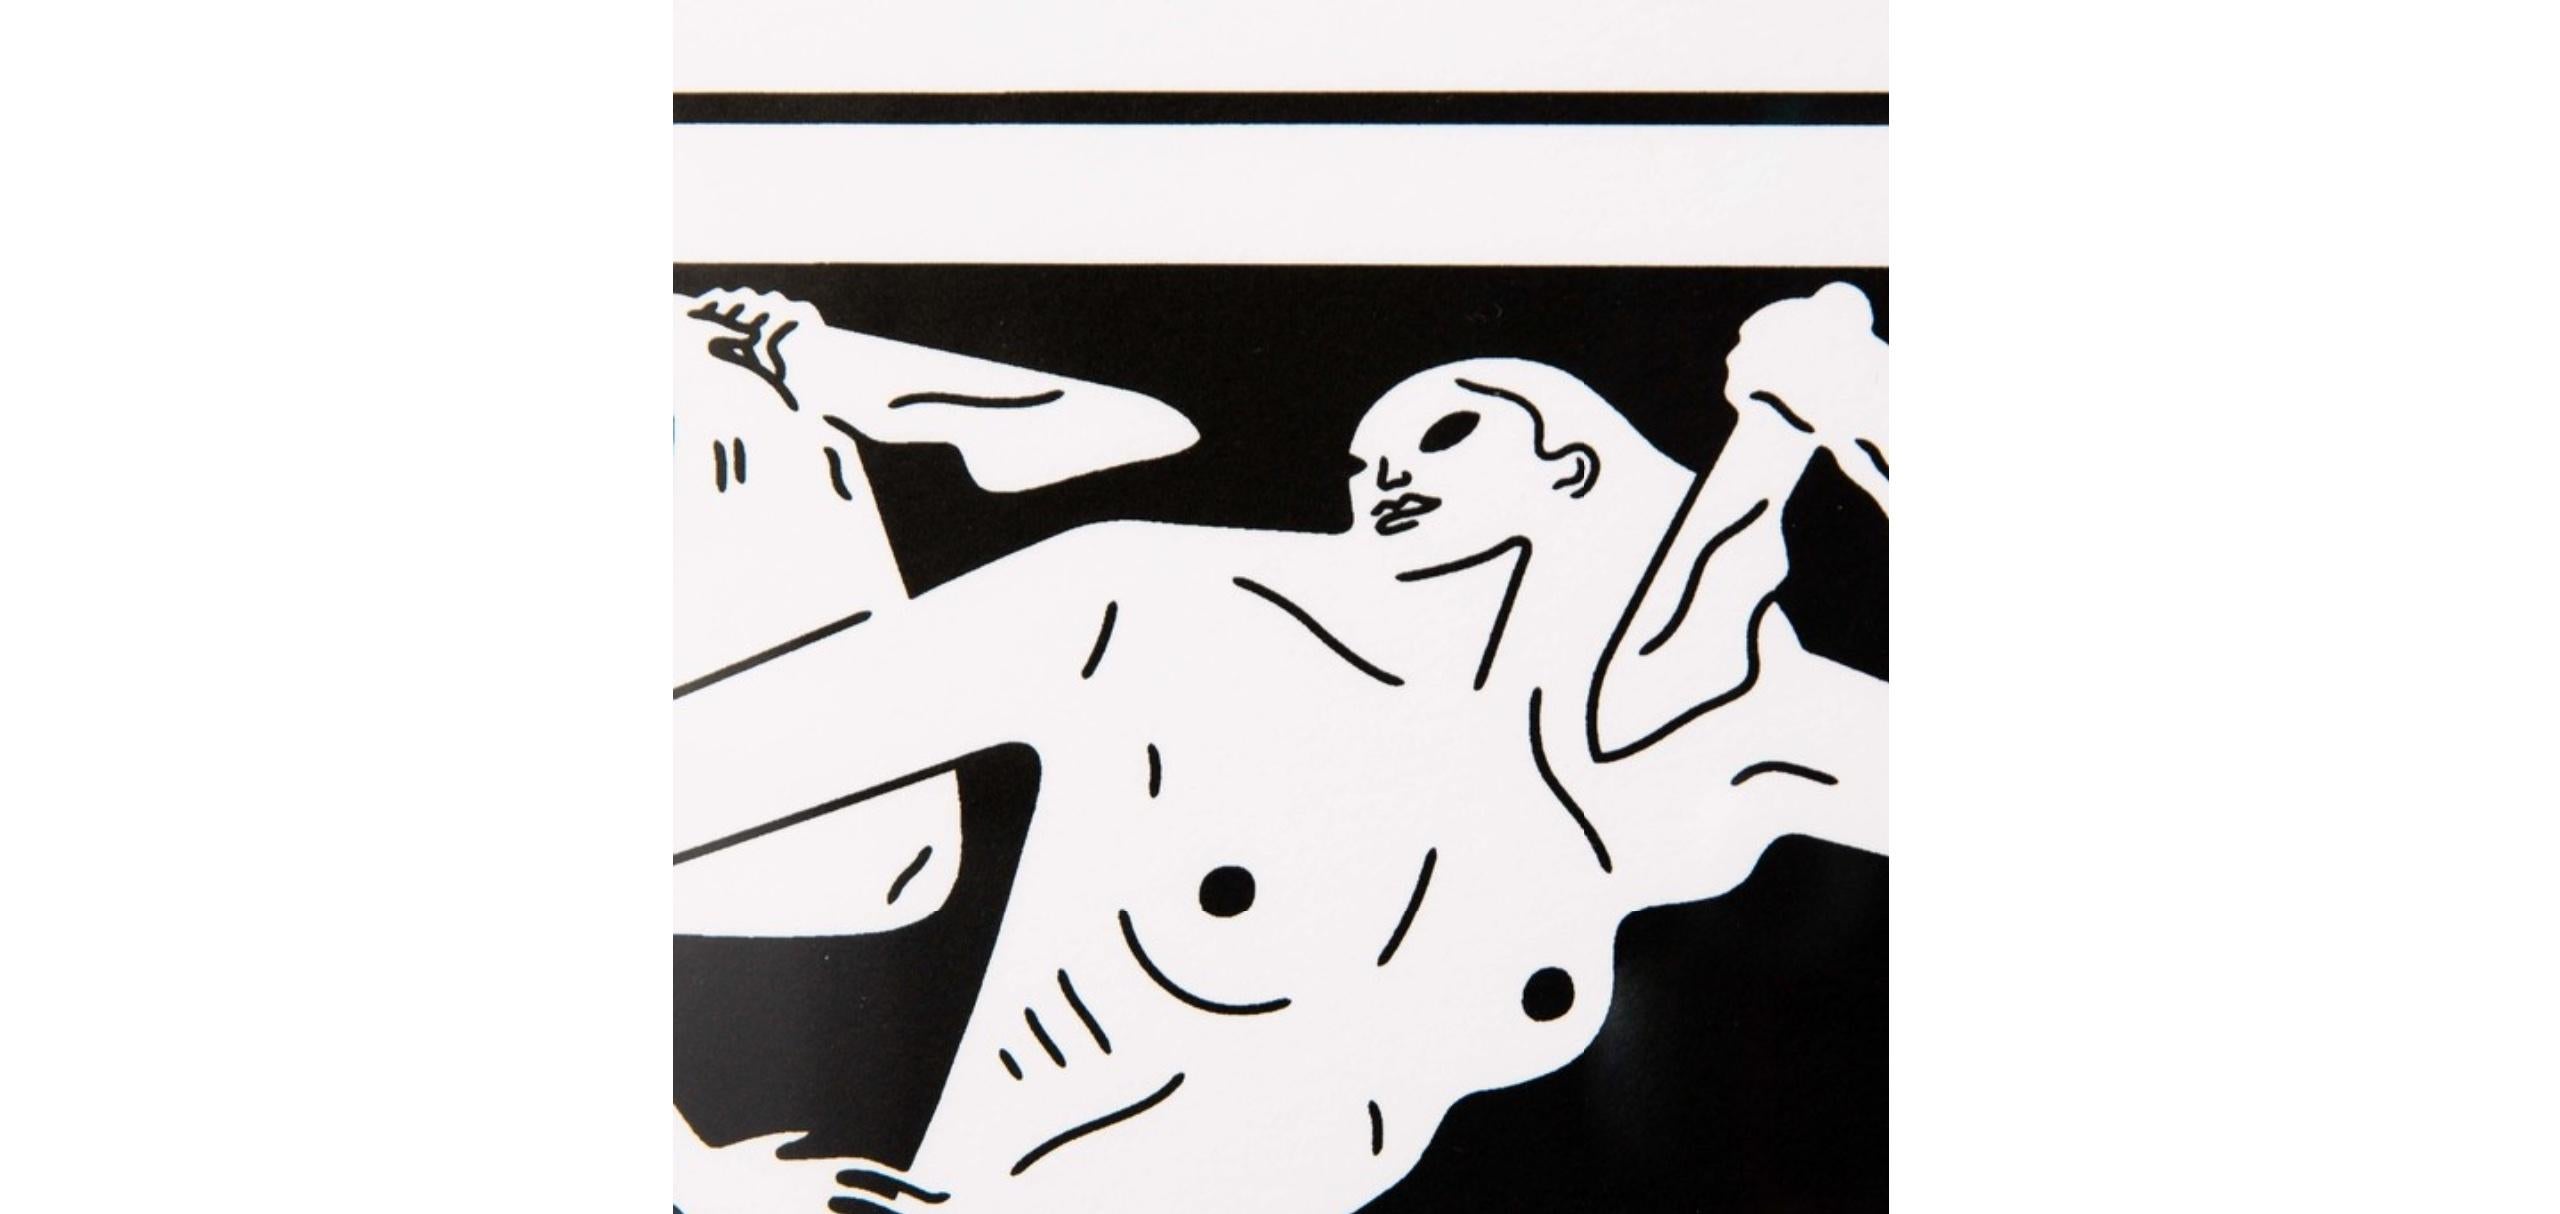 Amphora - Contemporary Print by Cleon Peterson